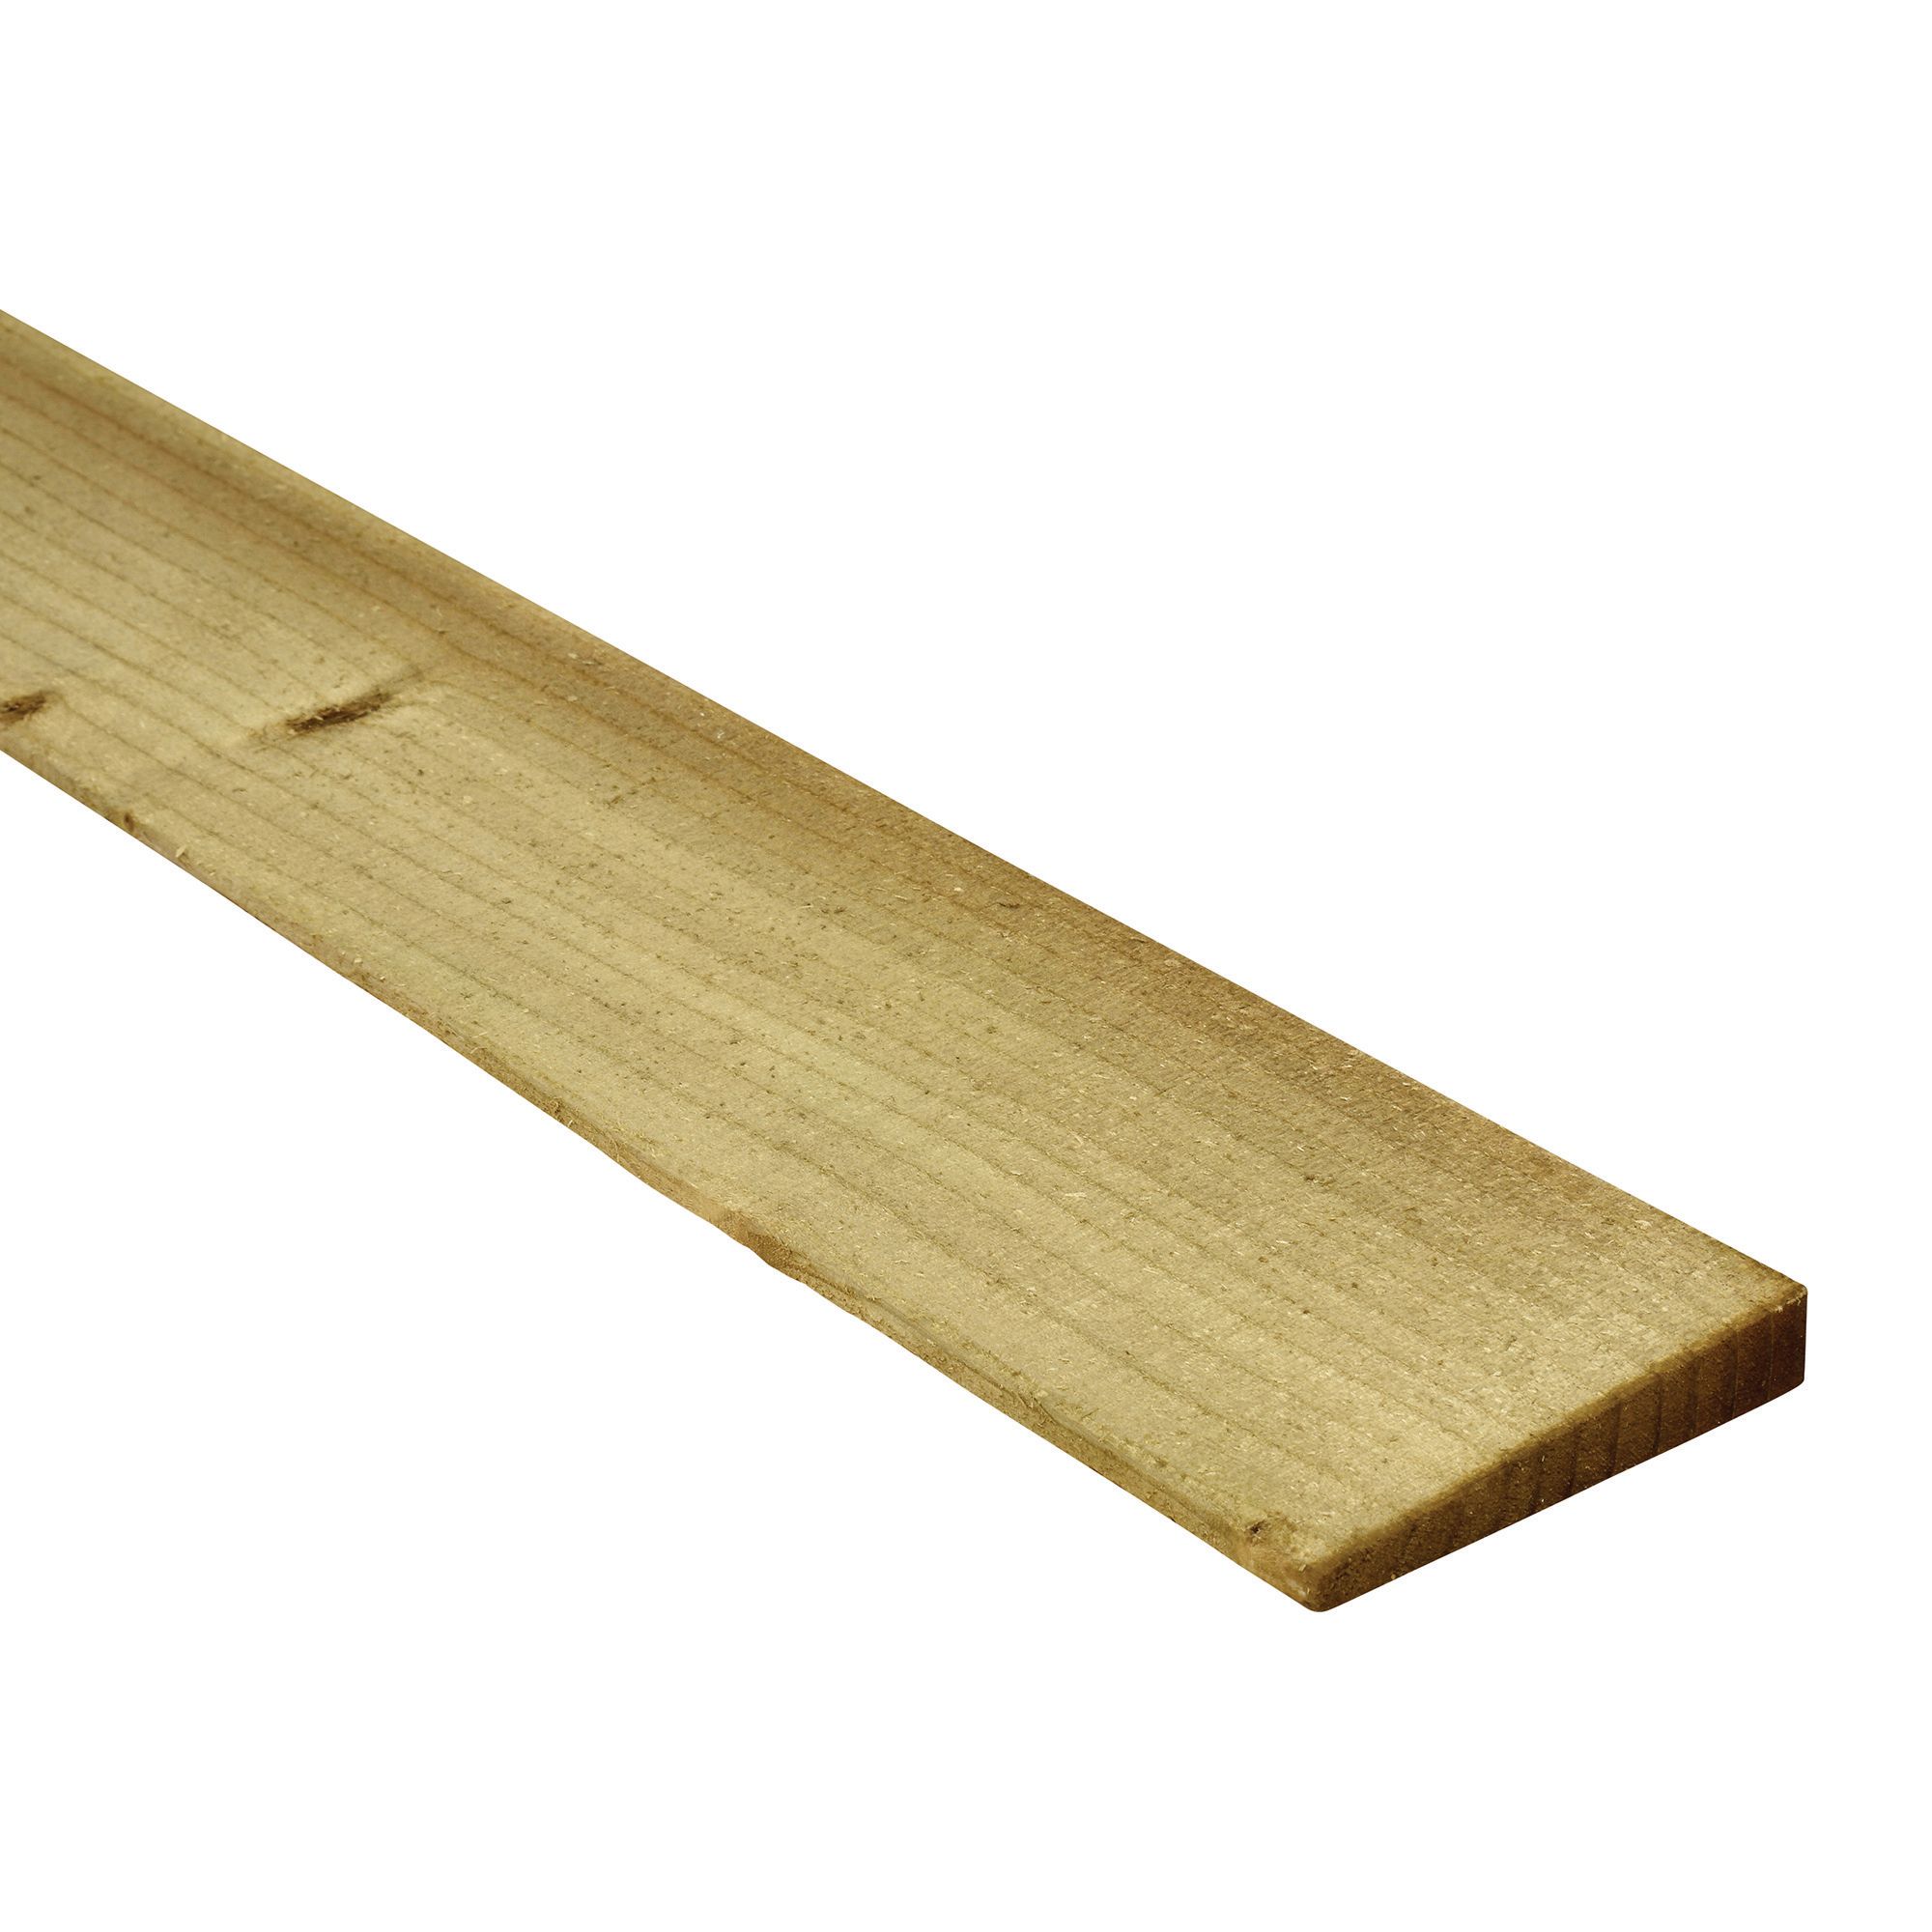 Image of Wickes Feather Edge Fence Board - 100 x 11mm x 1.8m